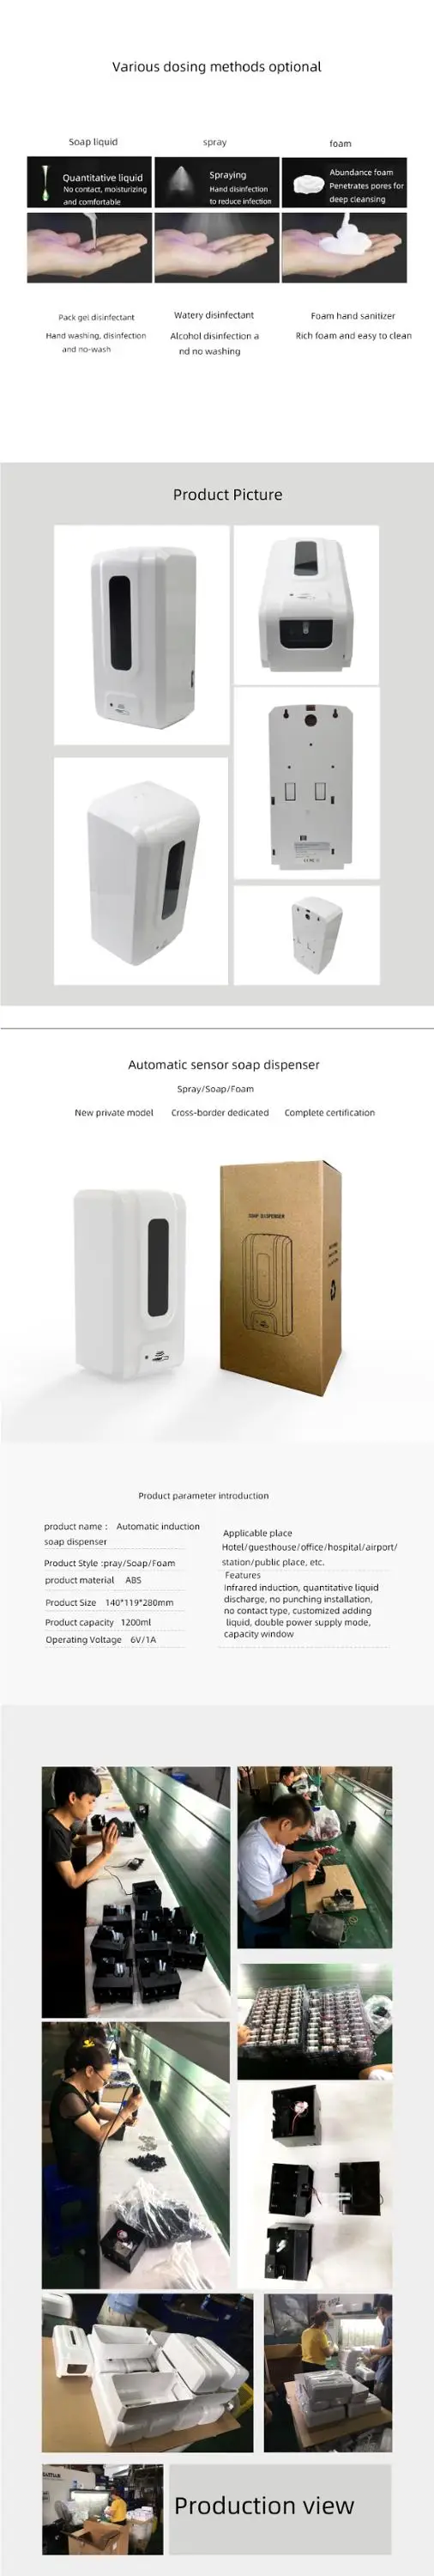 Wall-mounted sensor hands-free foaming non-contact automatic soap dispenser